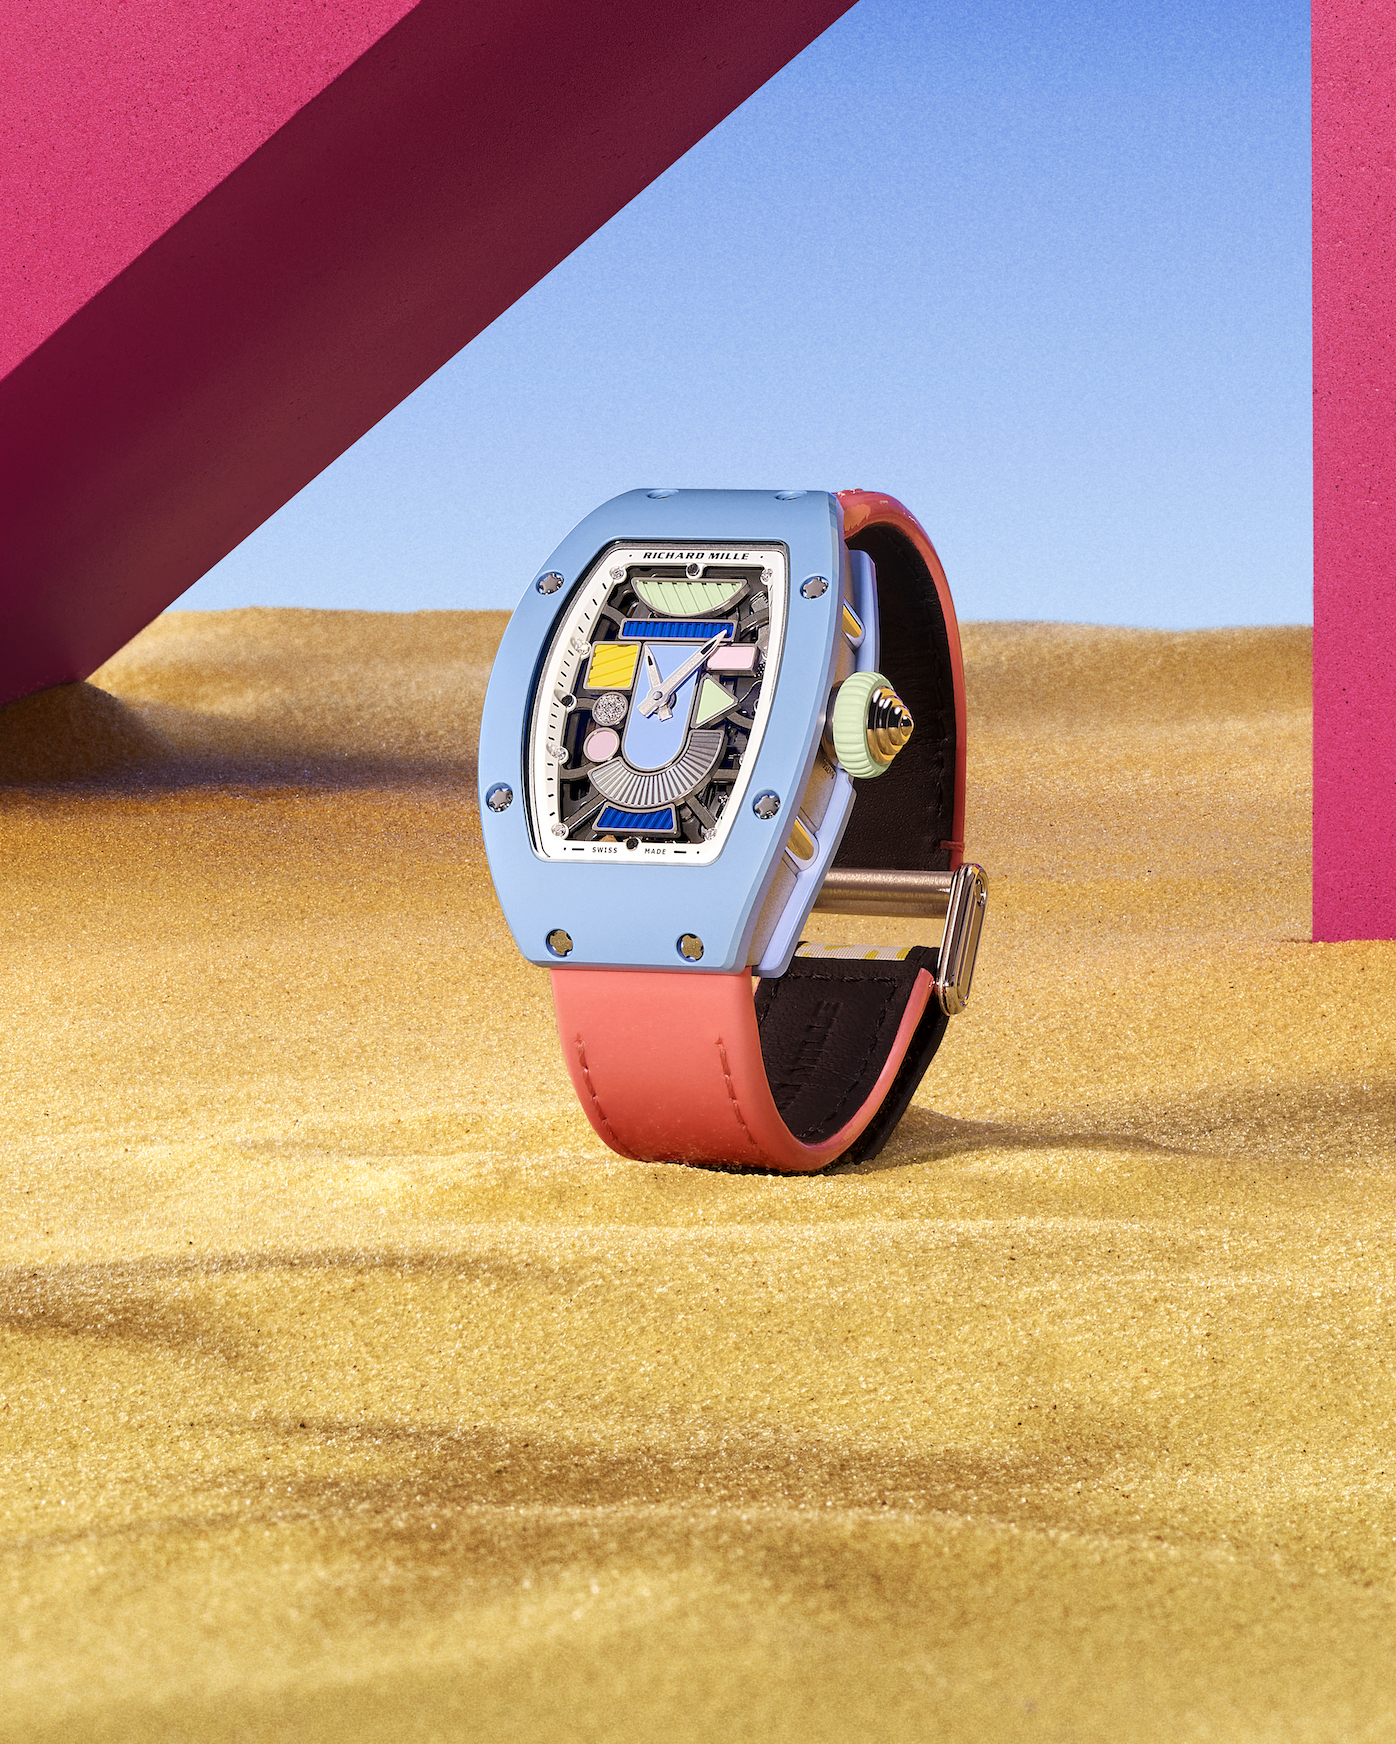 Richard MIlle RM 07-01 Colored Ceramic Capsule collection: Endless Summer. 